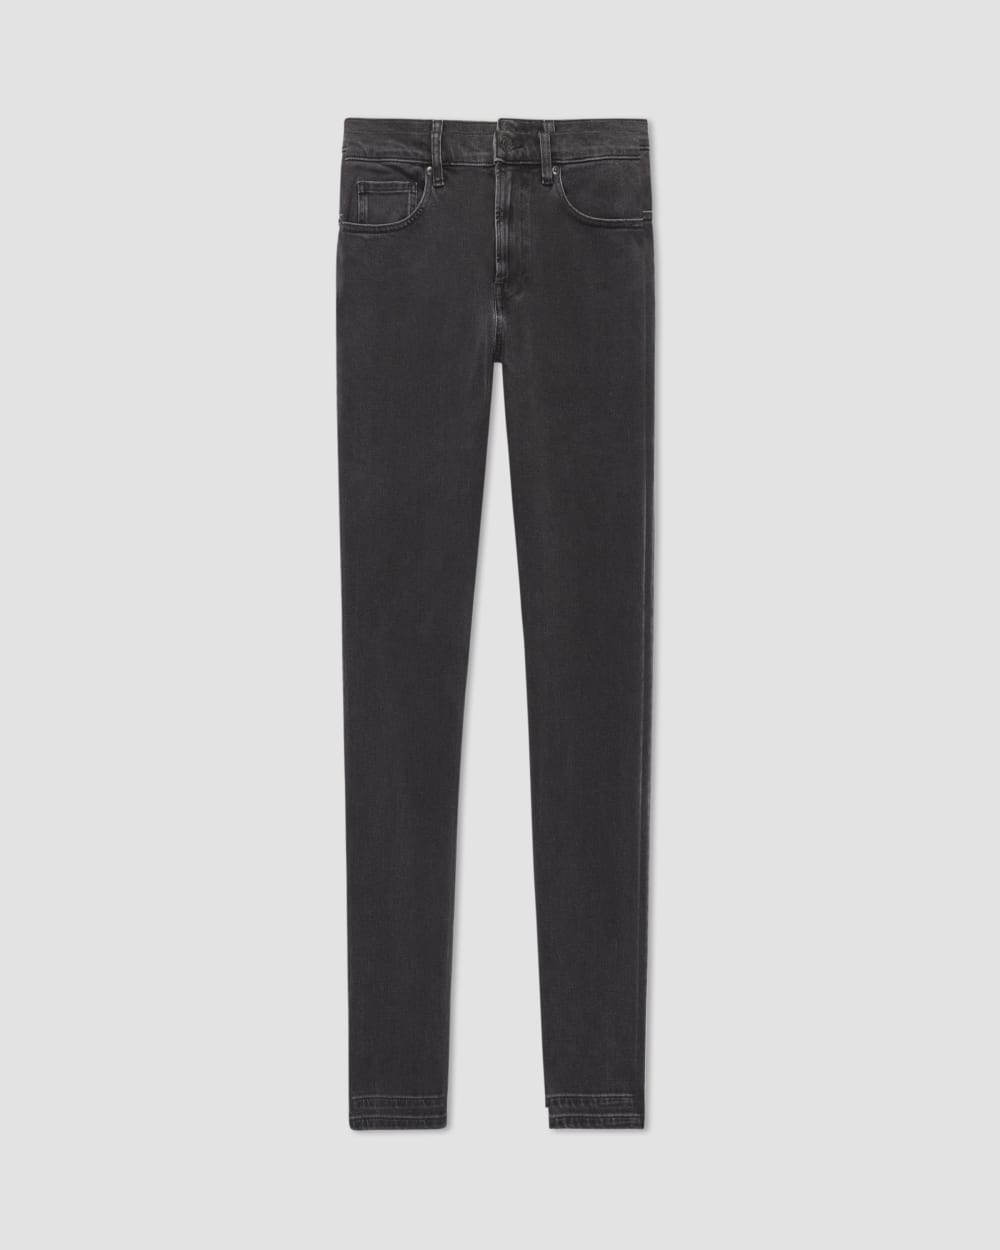 New Look slim rigid jeans in washed black